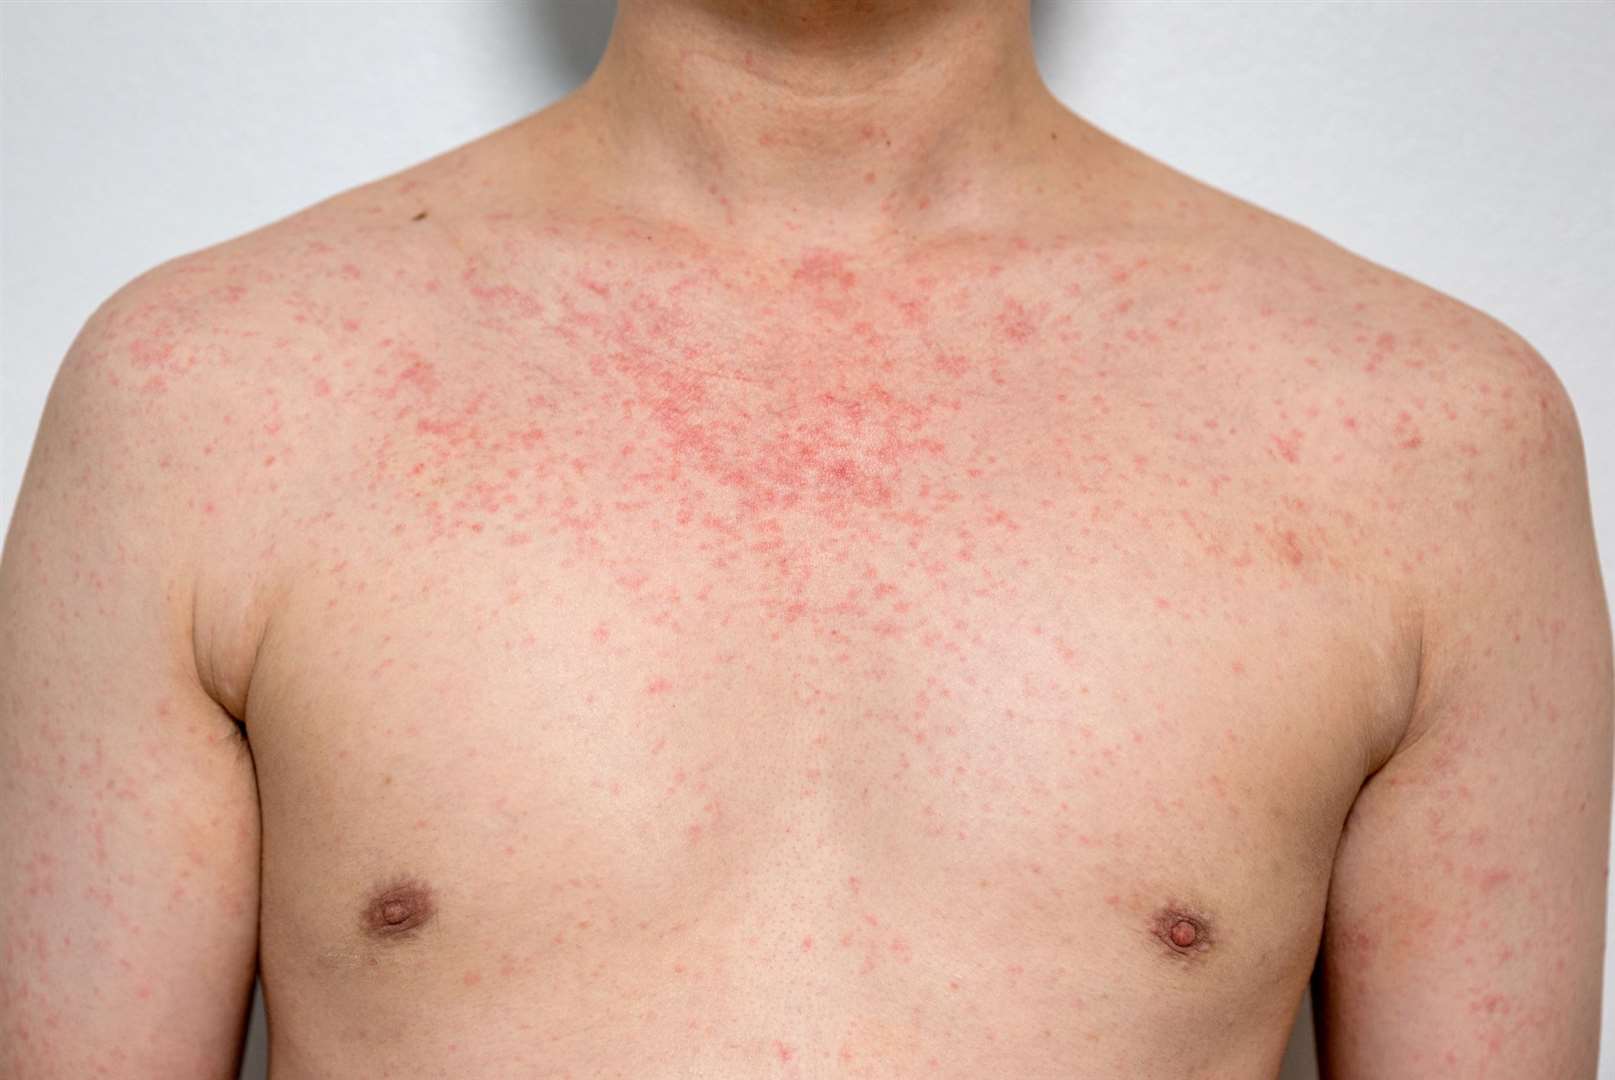 The UKHSA fears a measles outbreak. Image: iStock.